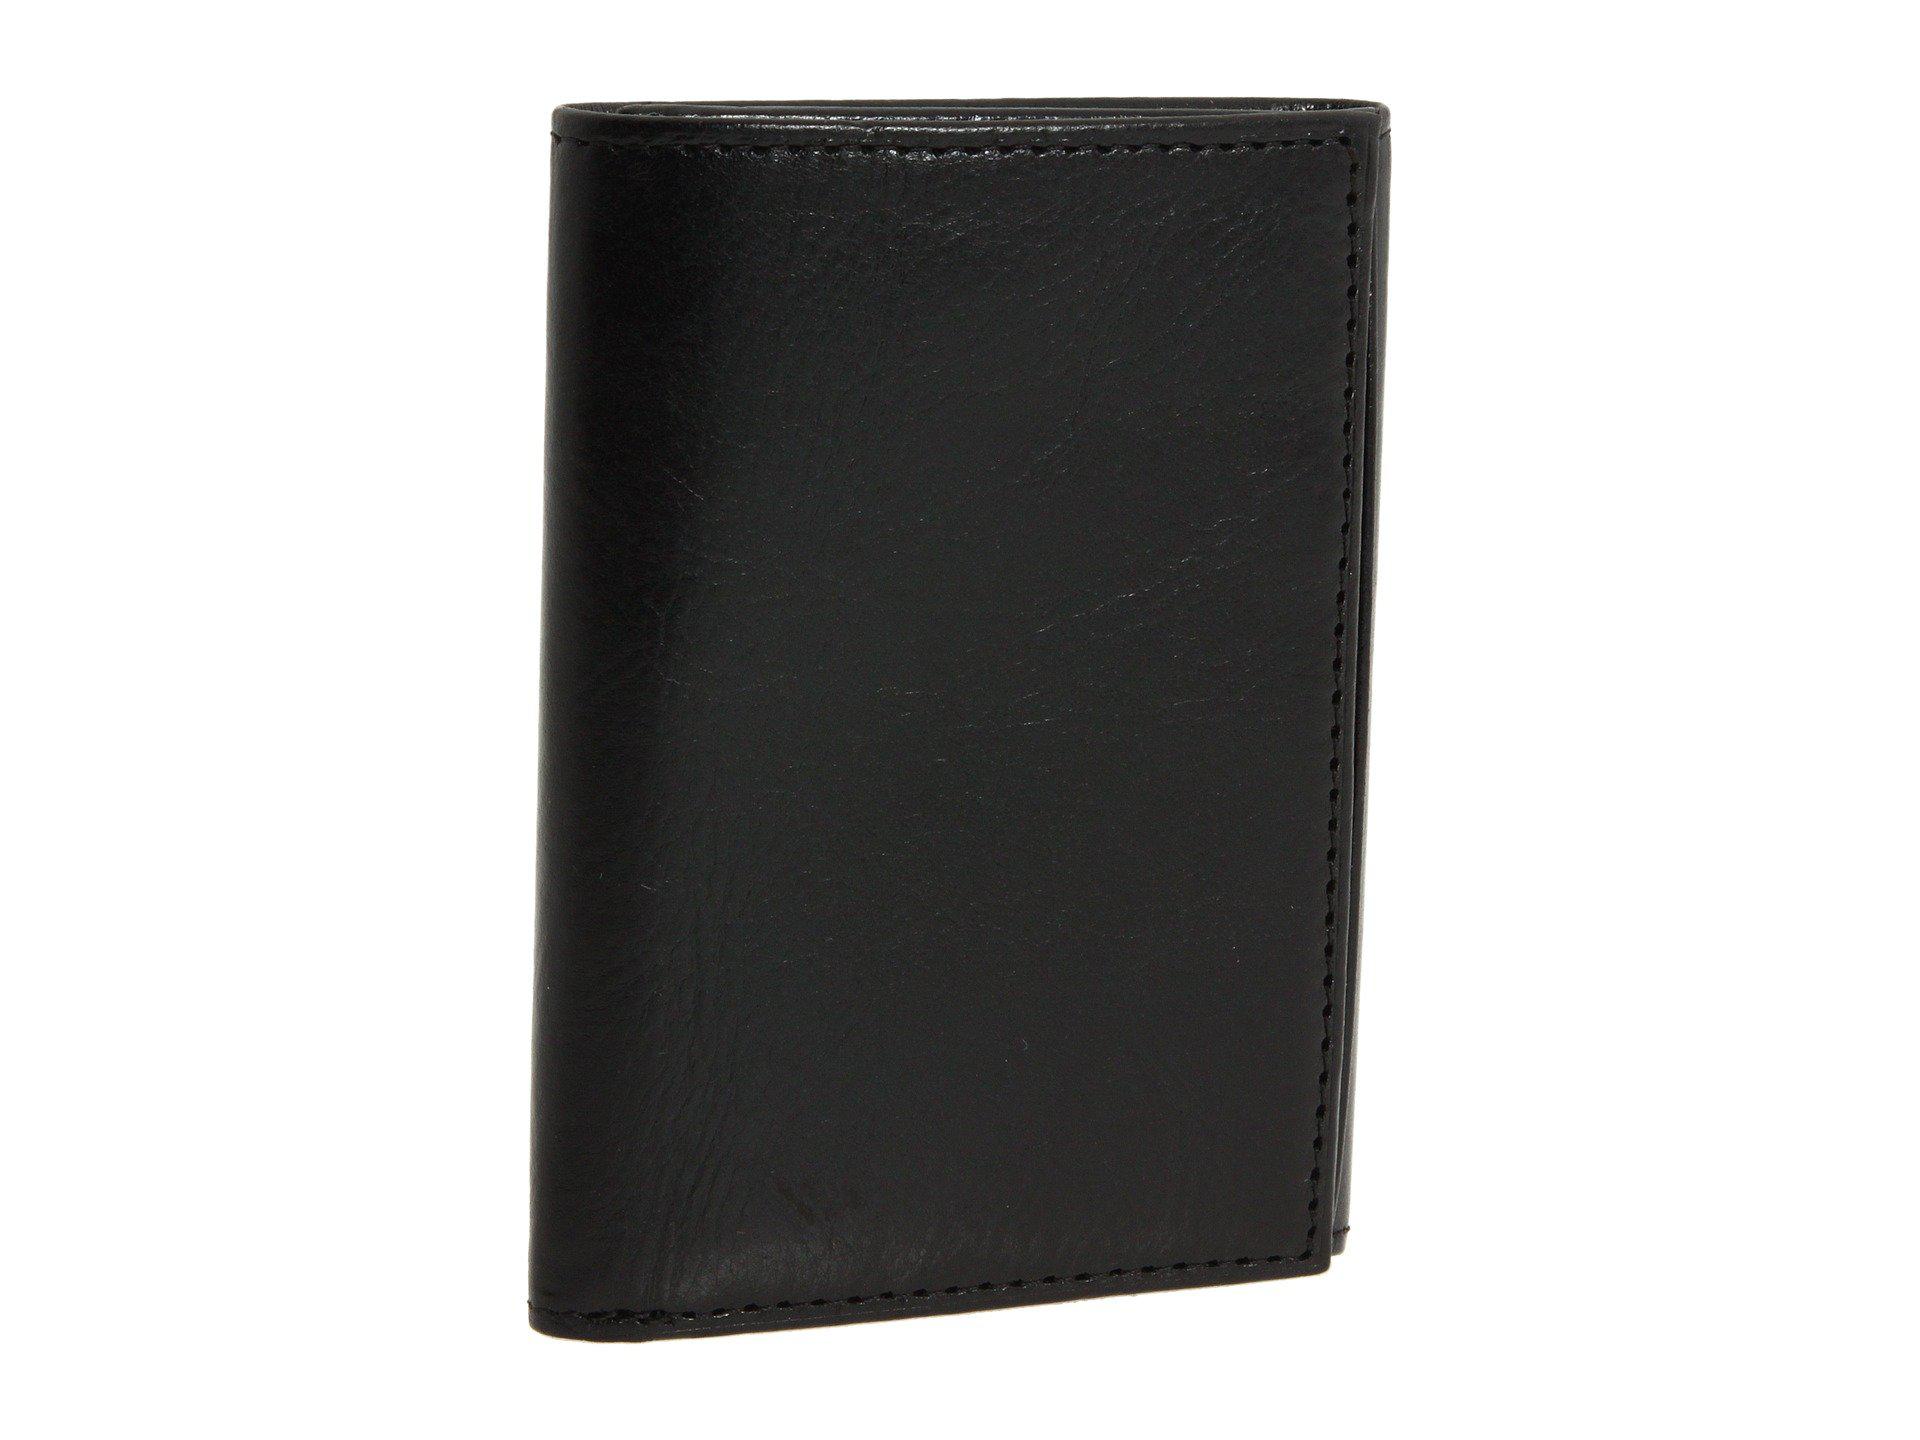 Lyst - Bosca Old Leather Collection - Trifold Wallet (black Leather ...